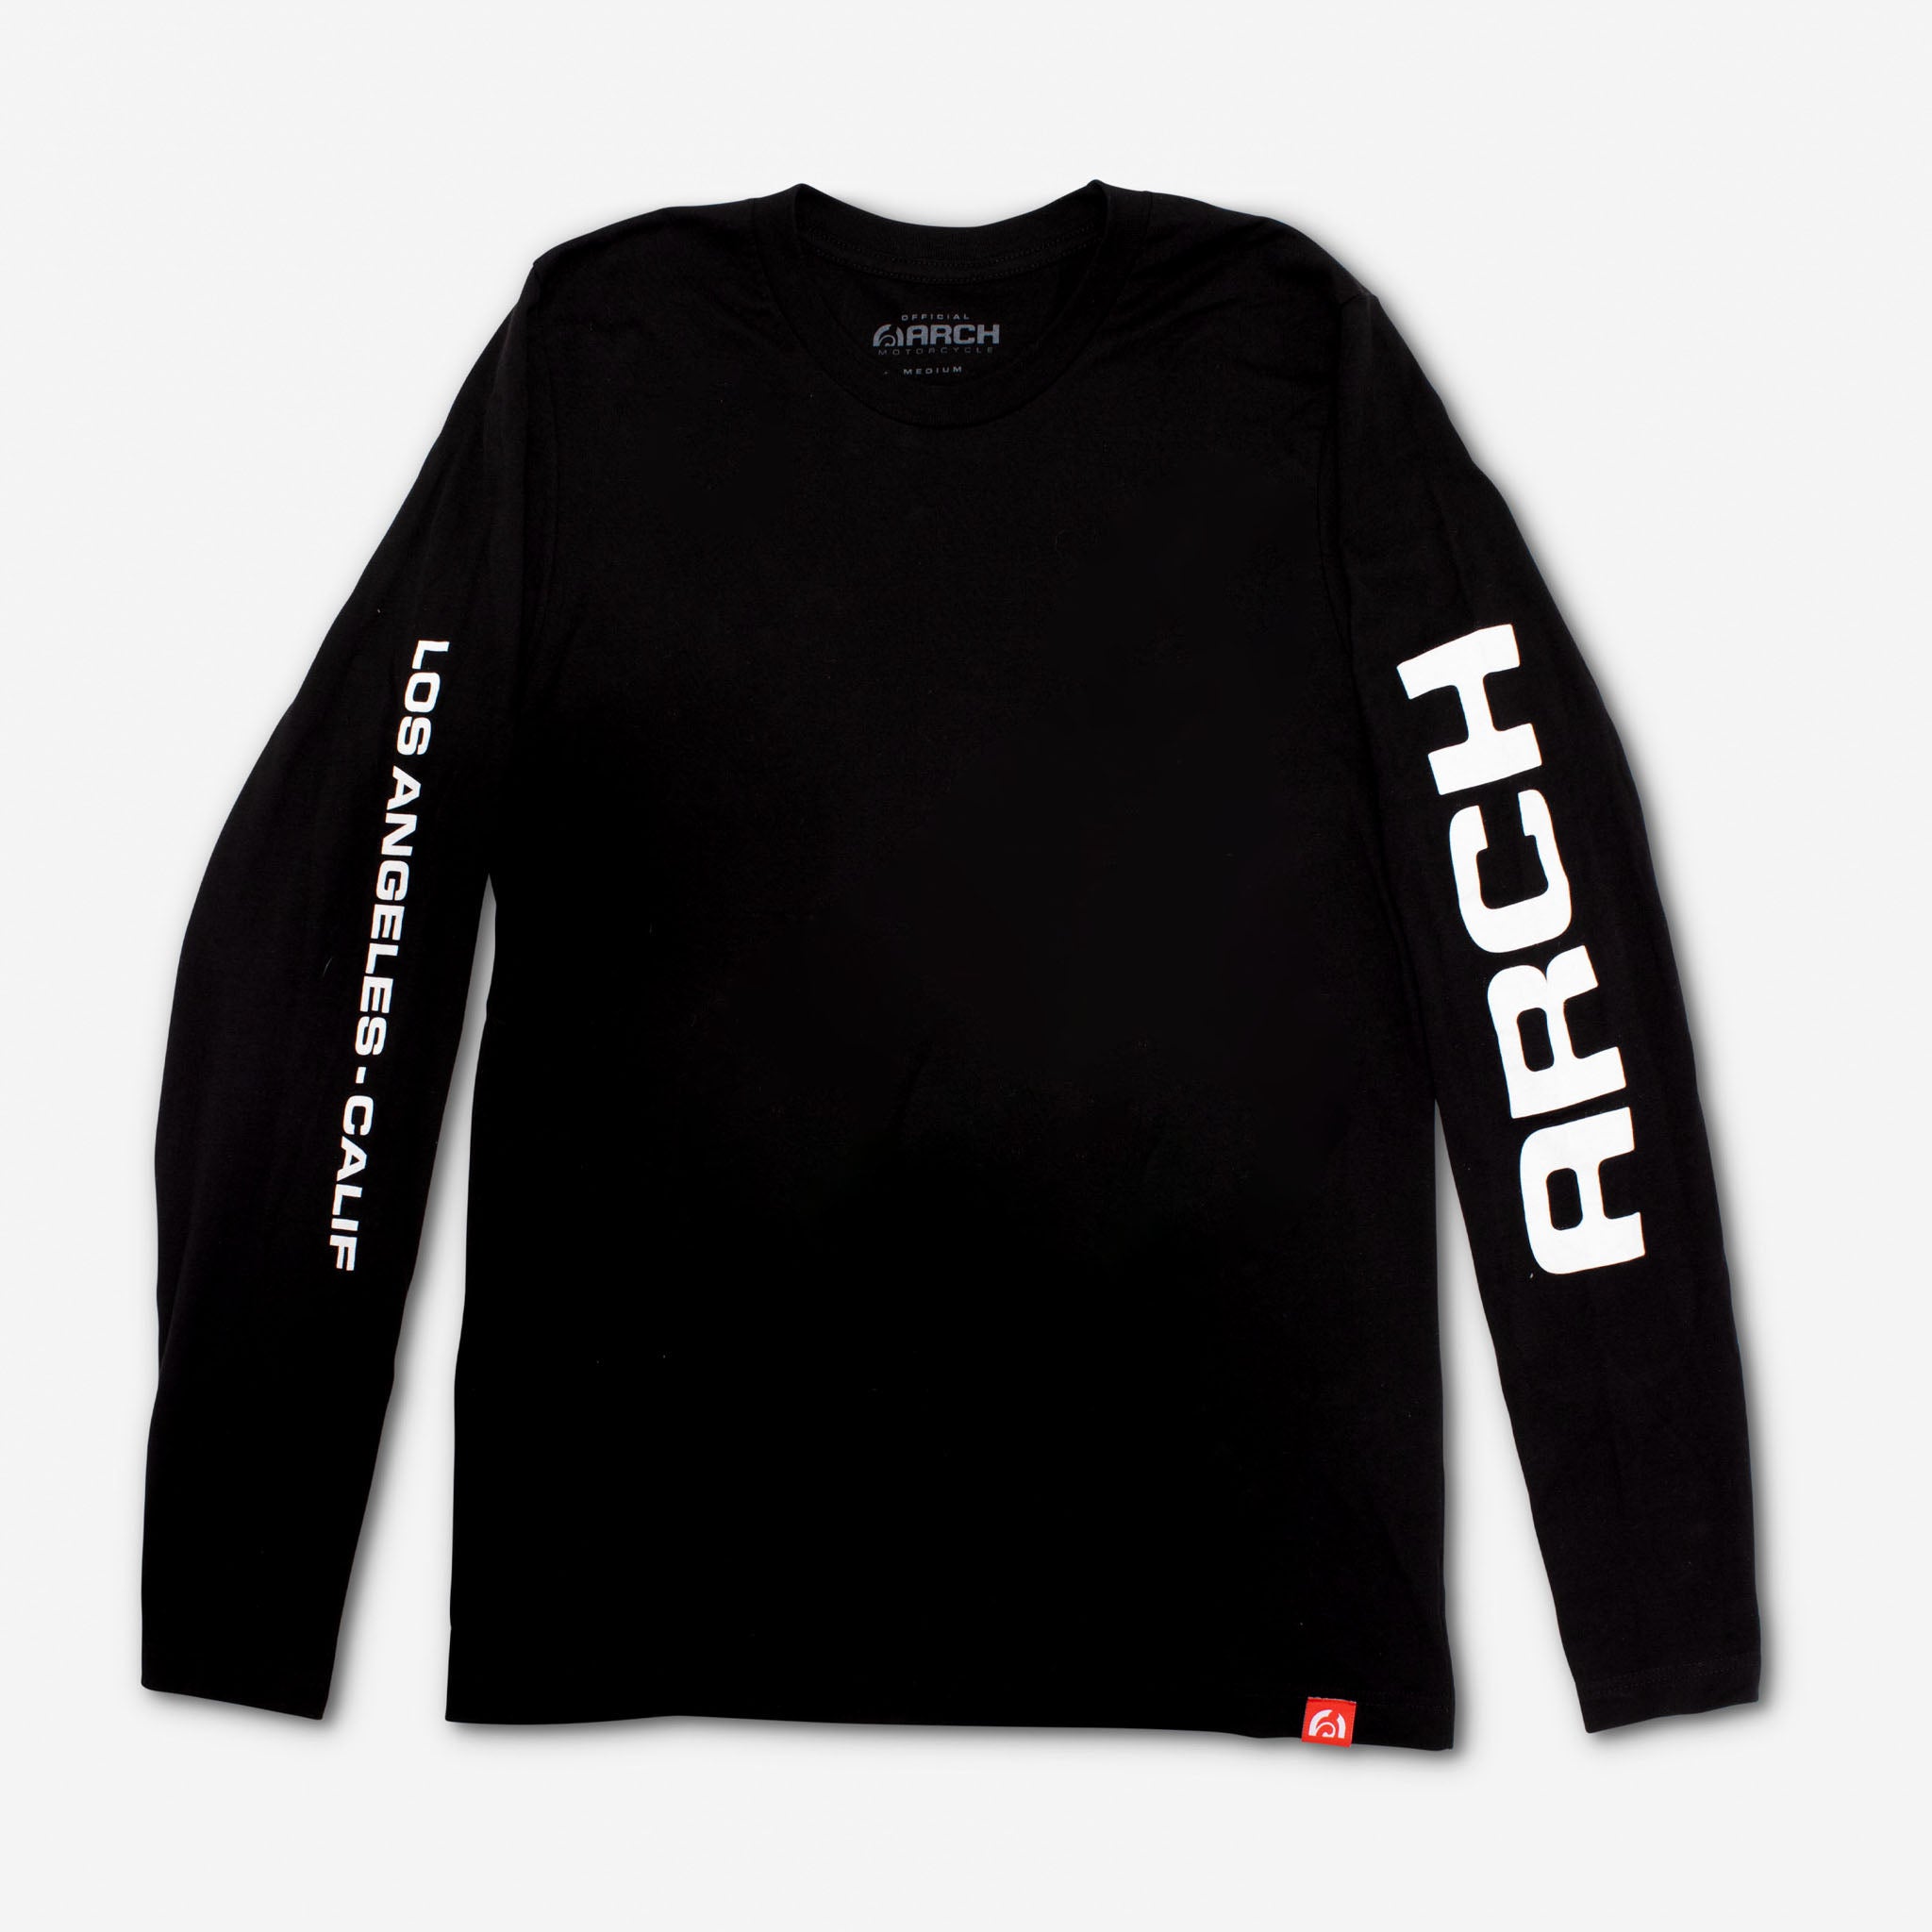 ARCH Motorcycle B&W Long Sleeve T-Shirt